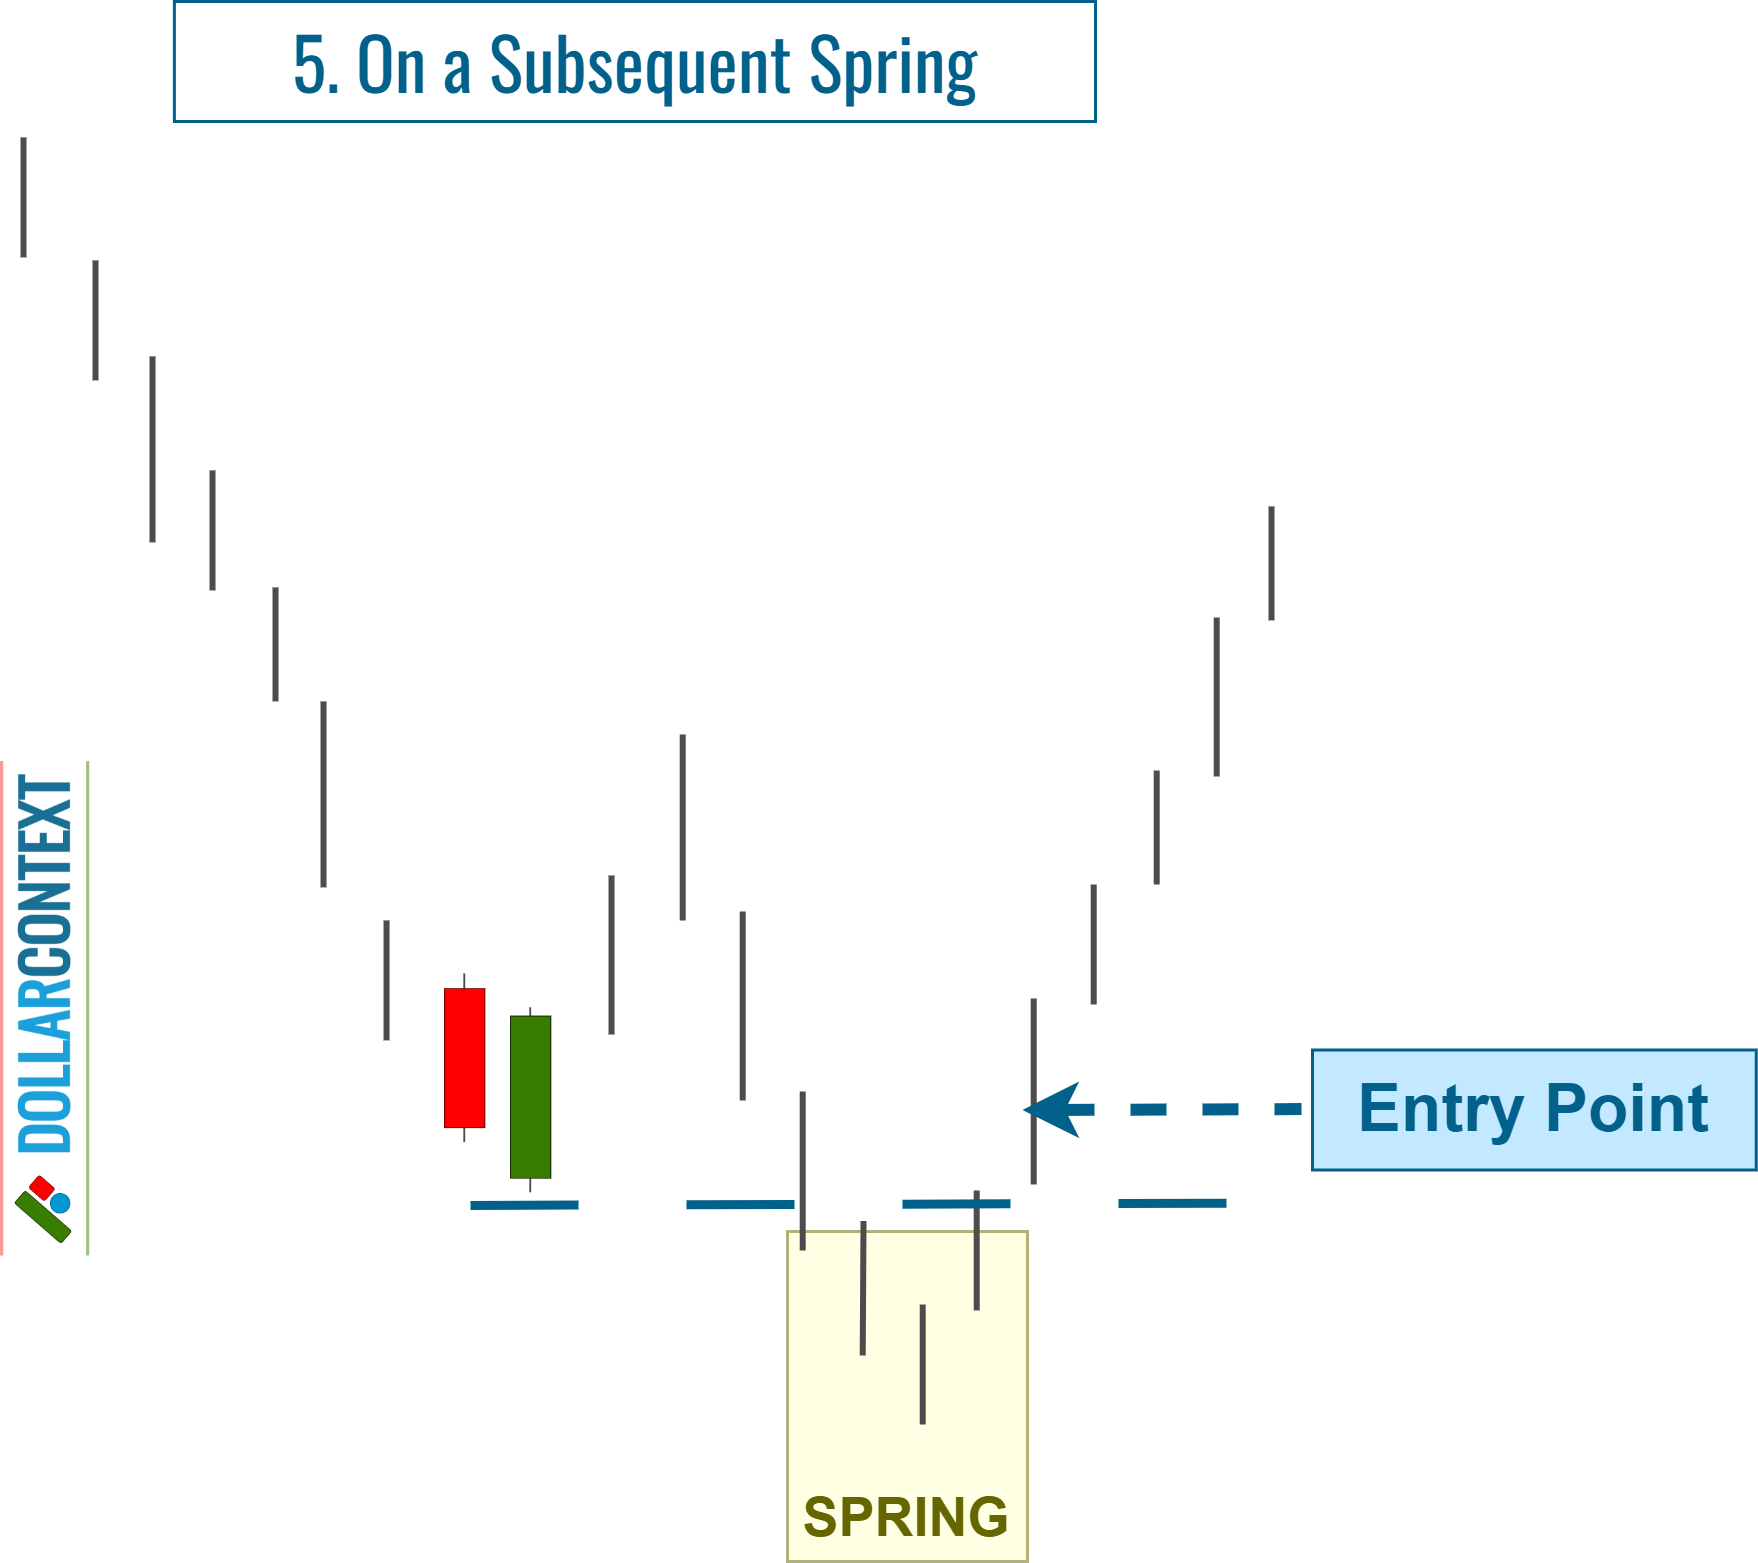 Piercing Pattern: Entering on a Subsequent Spring